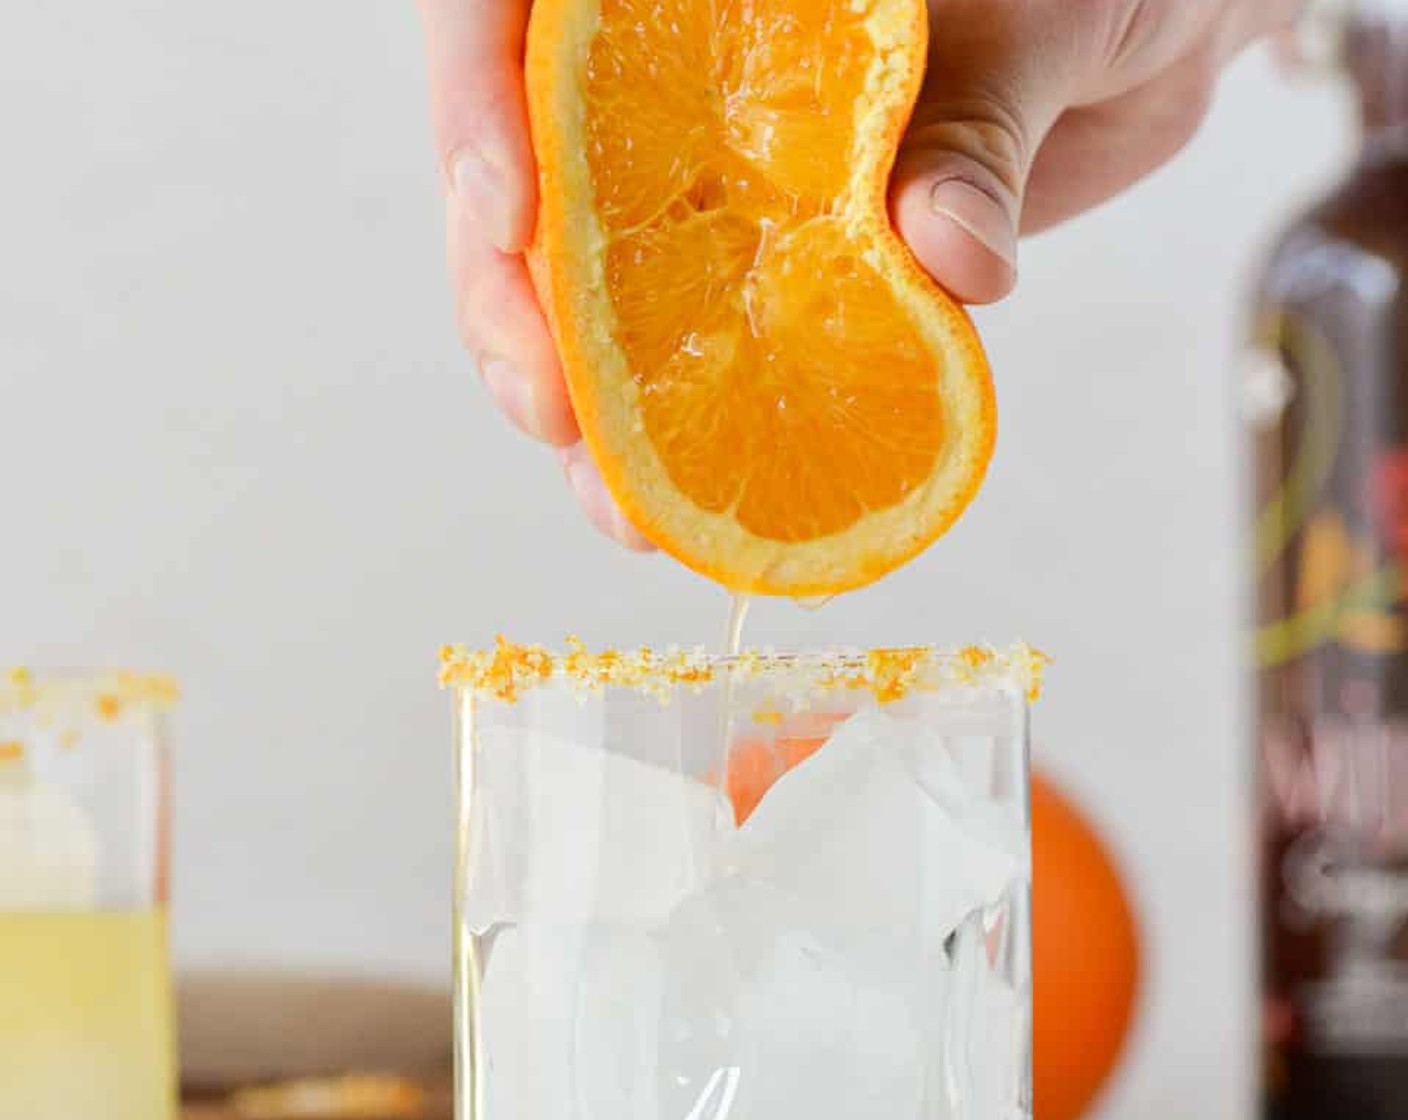 step 1 Squeeze Limes (2) and Orange (1) into a glass filled with ice. Add PATRÓN® Silver Tequila (4 oz). Stir.